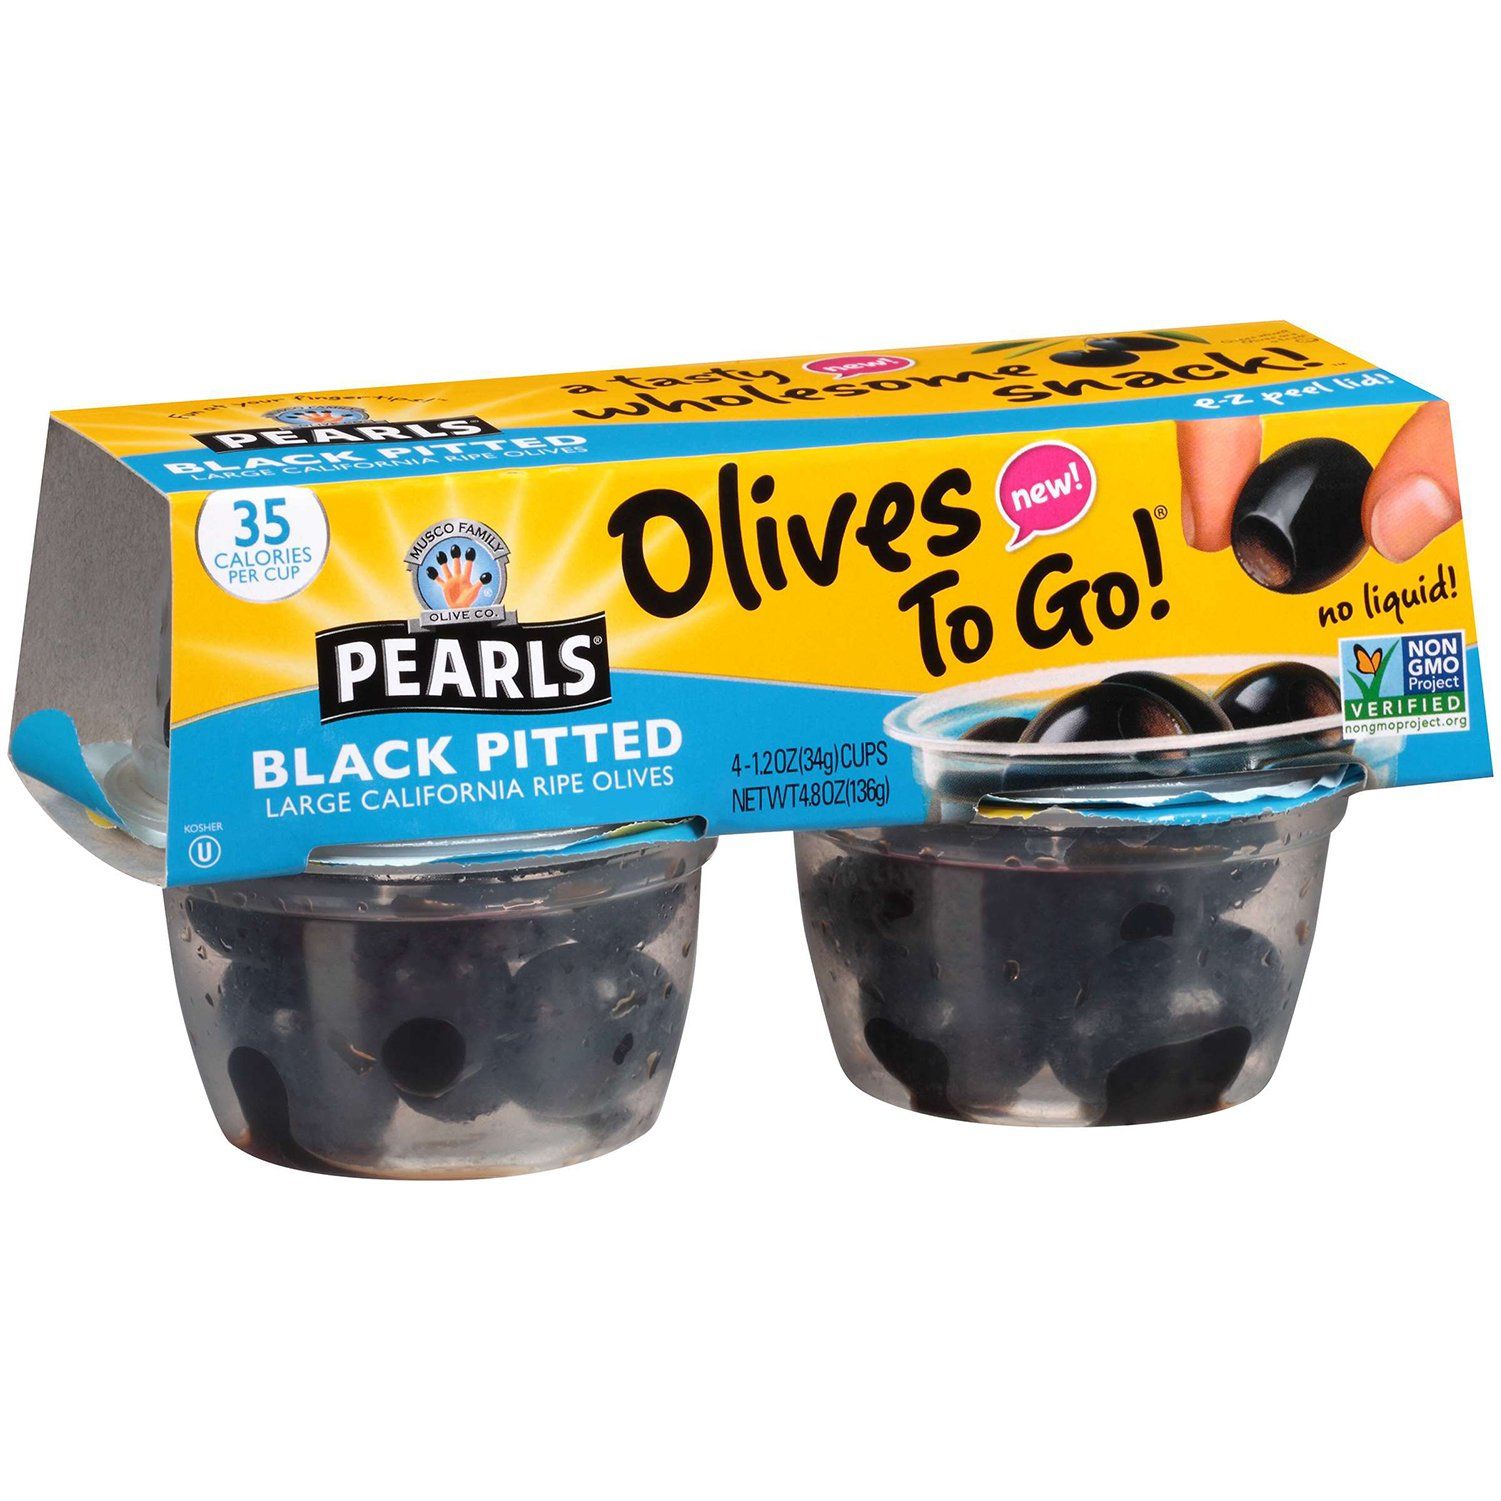 Pearls Olives To Go Cups Pearls Black Pitted 1.2 Oz-4 Count 